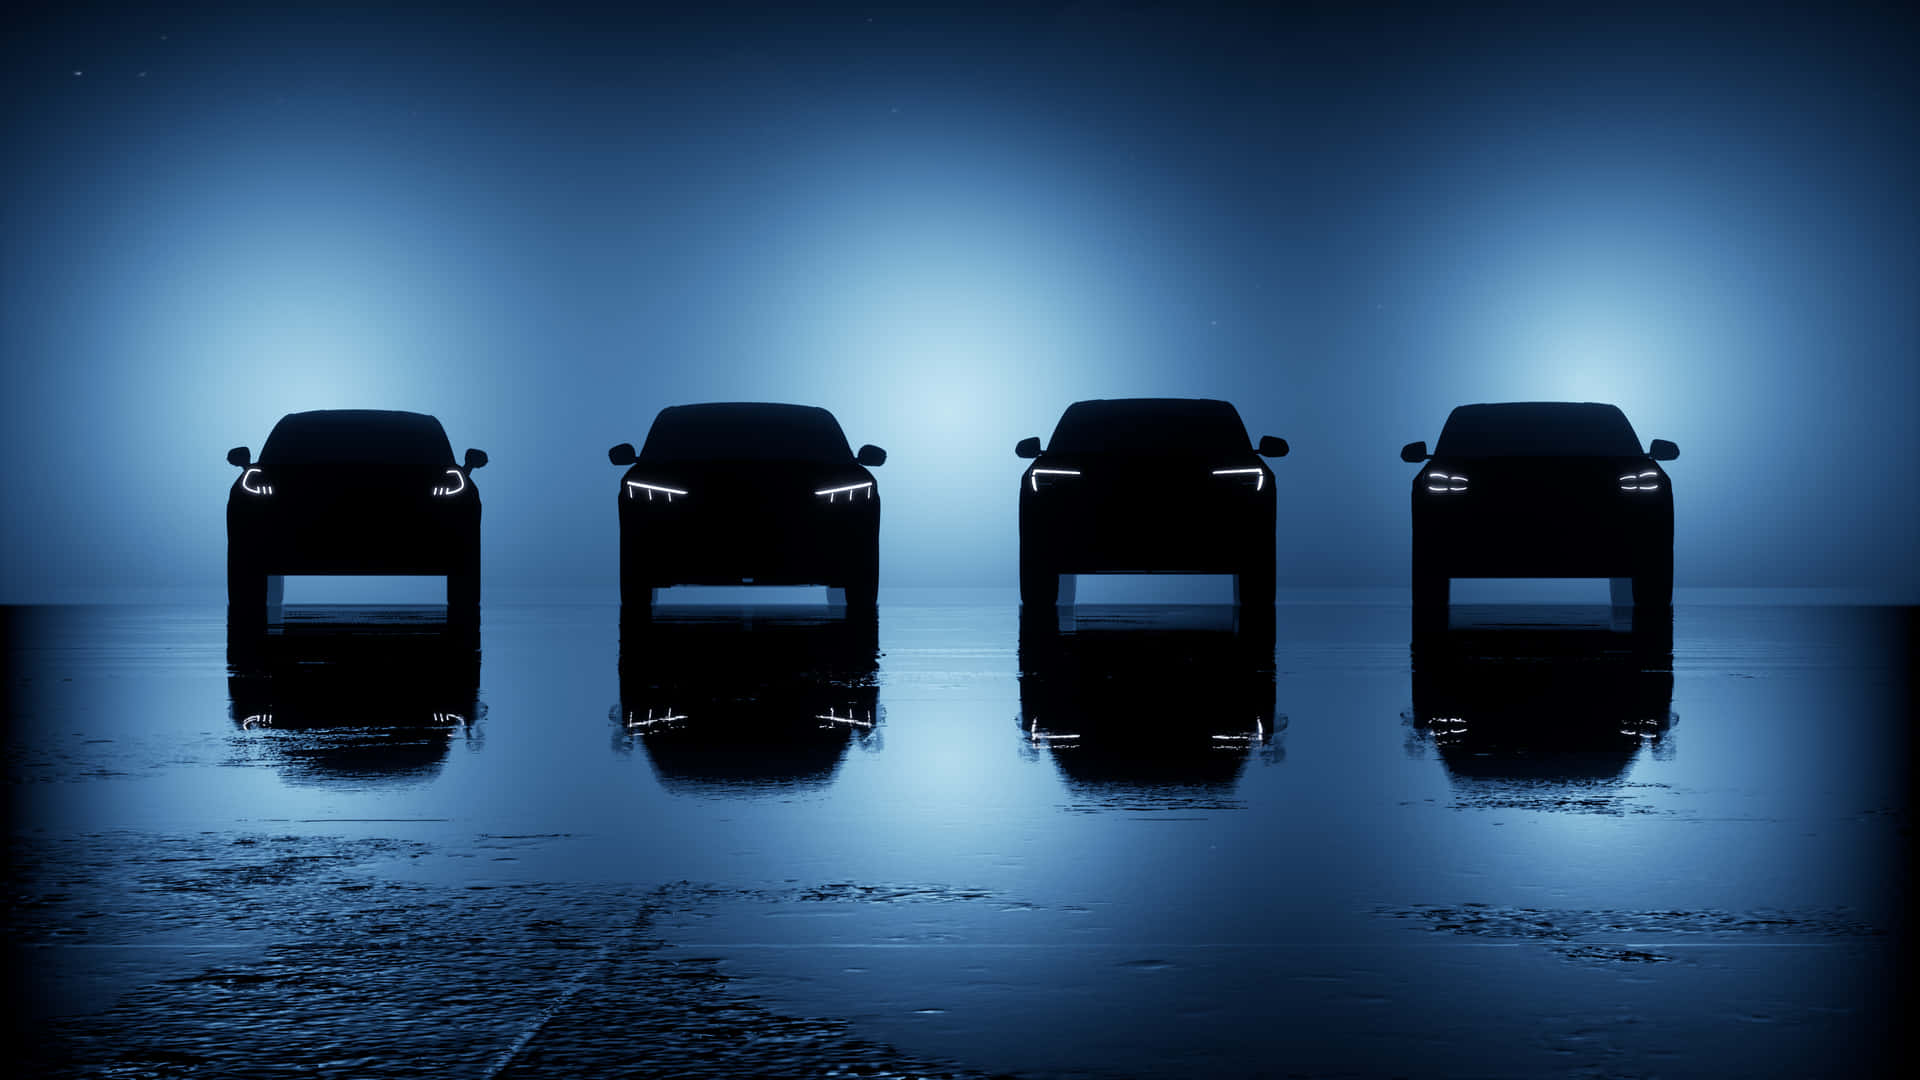 Four Suvs Are Lined Up In A Dark Room